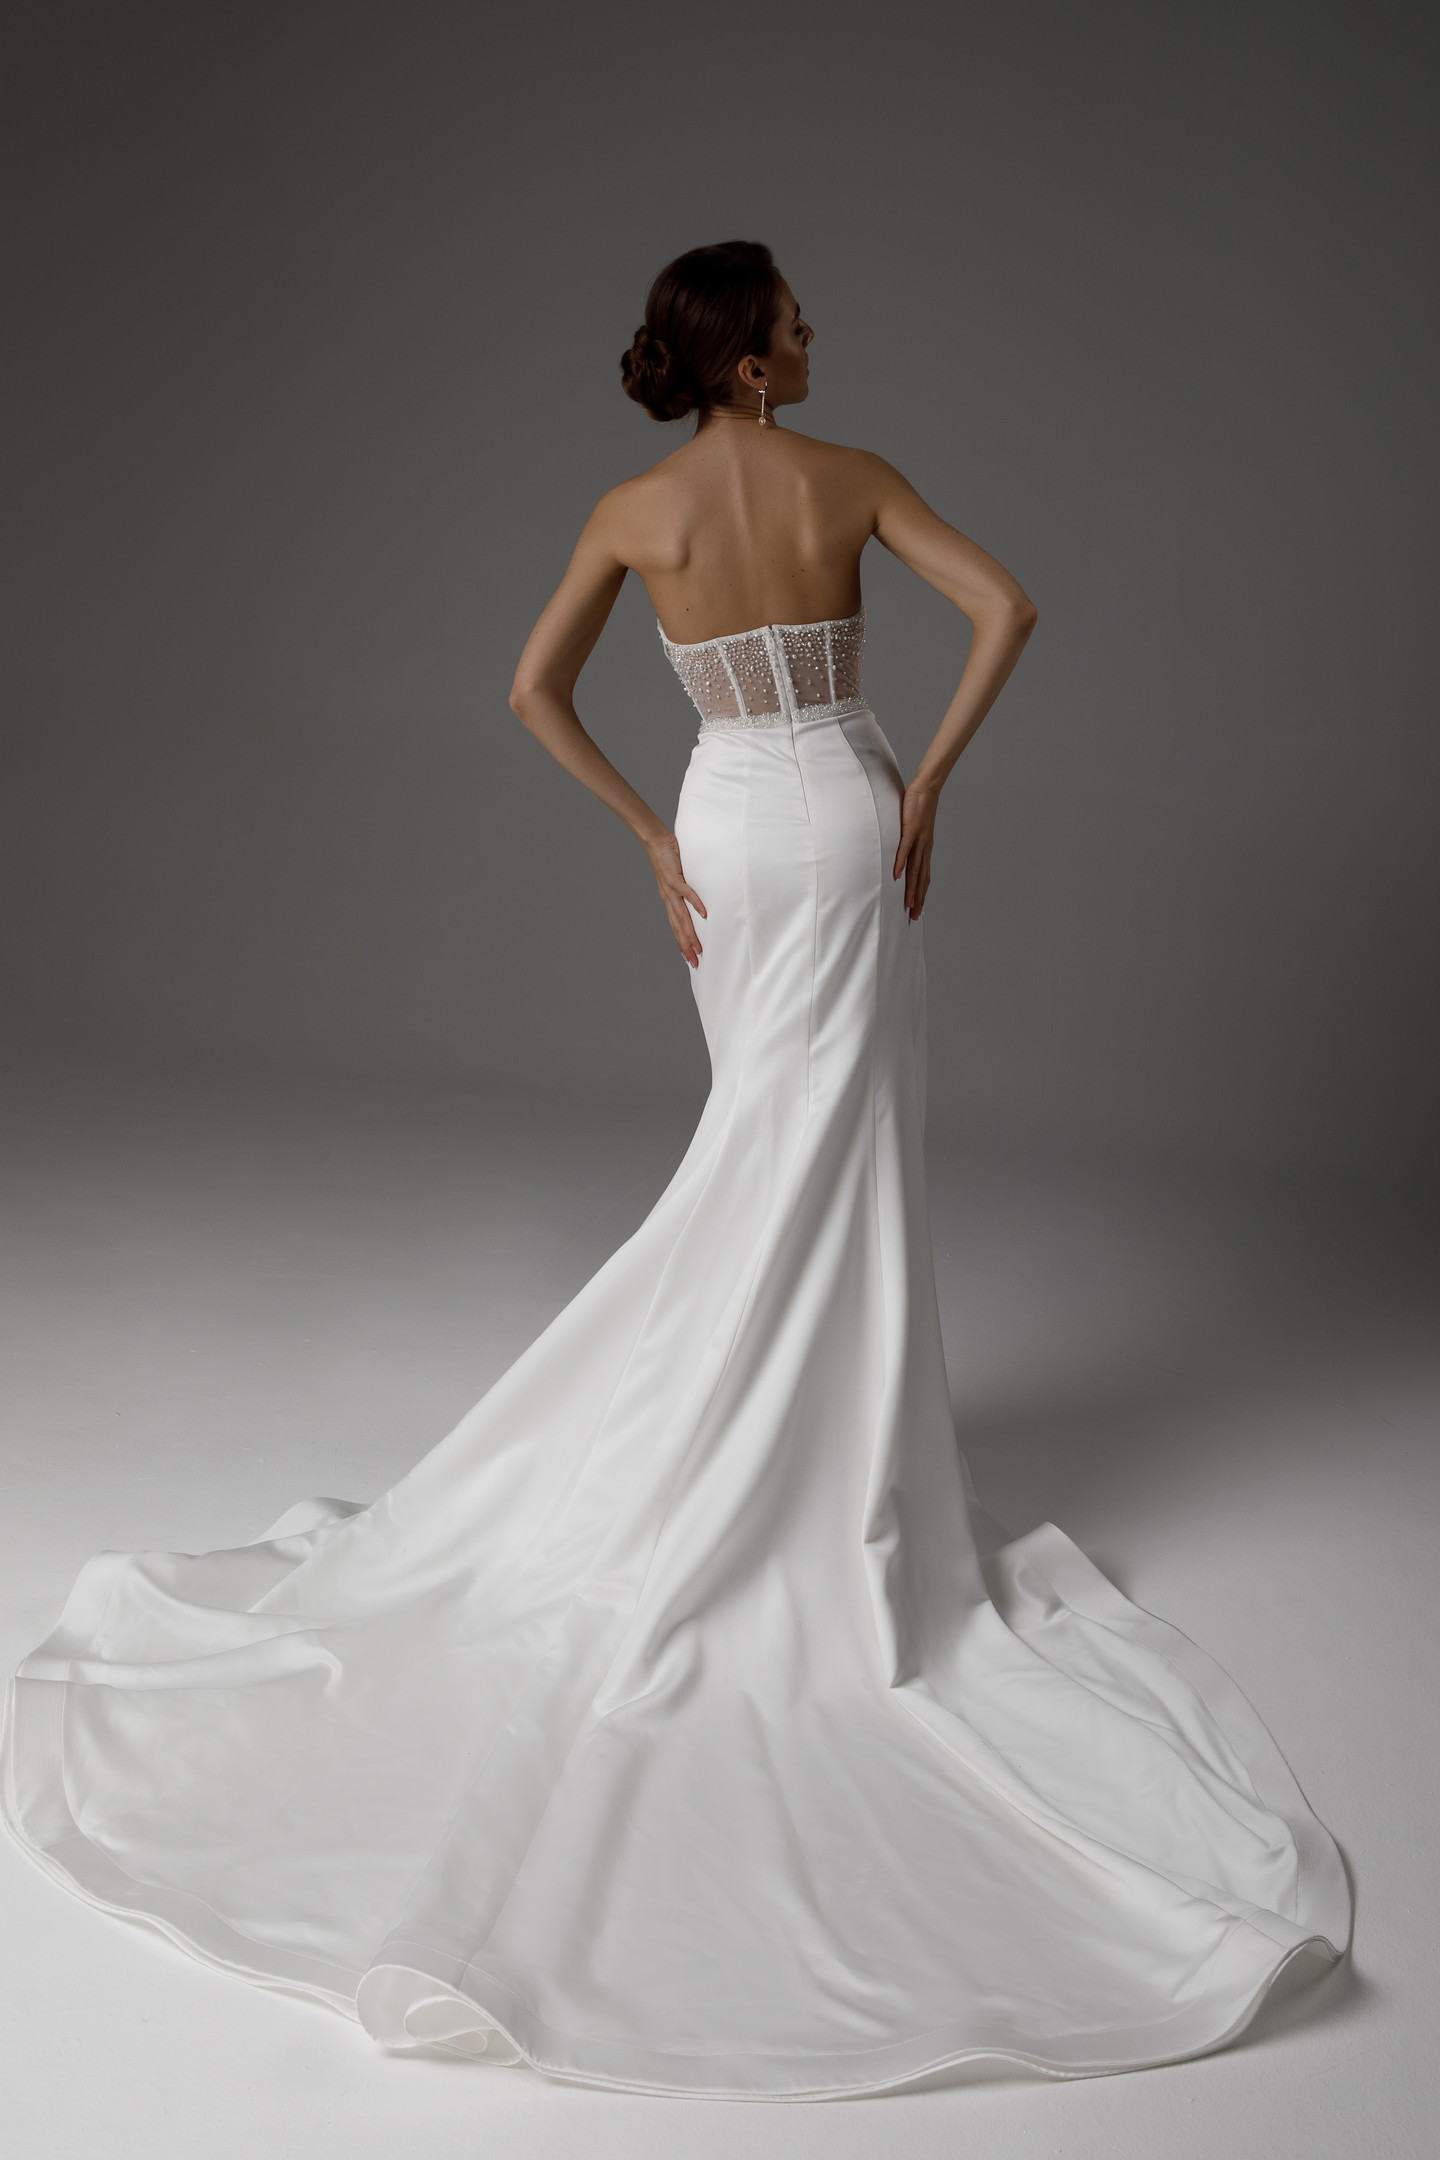 Vilma gown, 2021, couture, dress, bridal, off-white, satin, embroidery, sheath silhouette, train